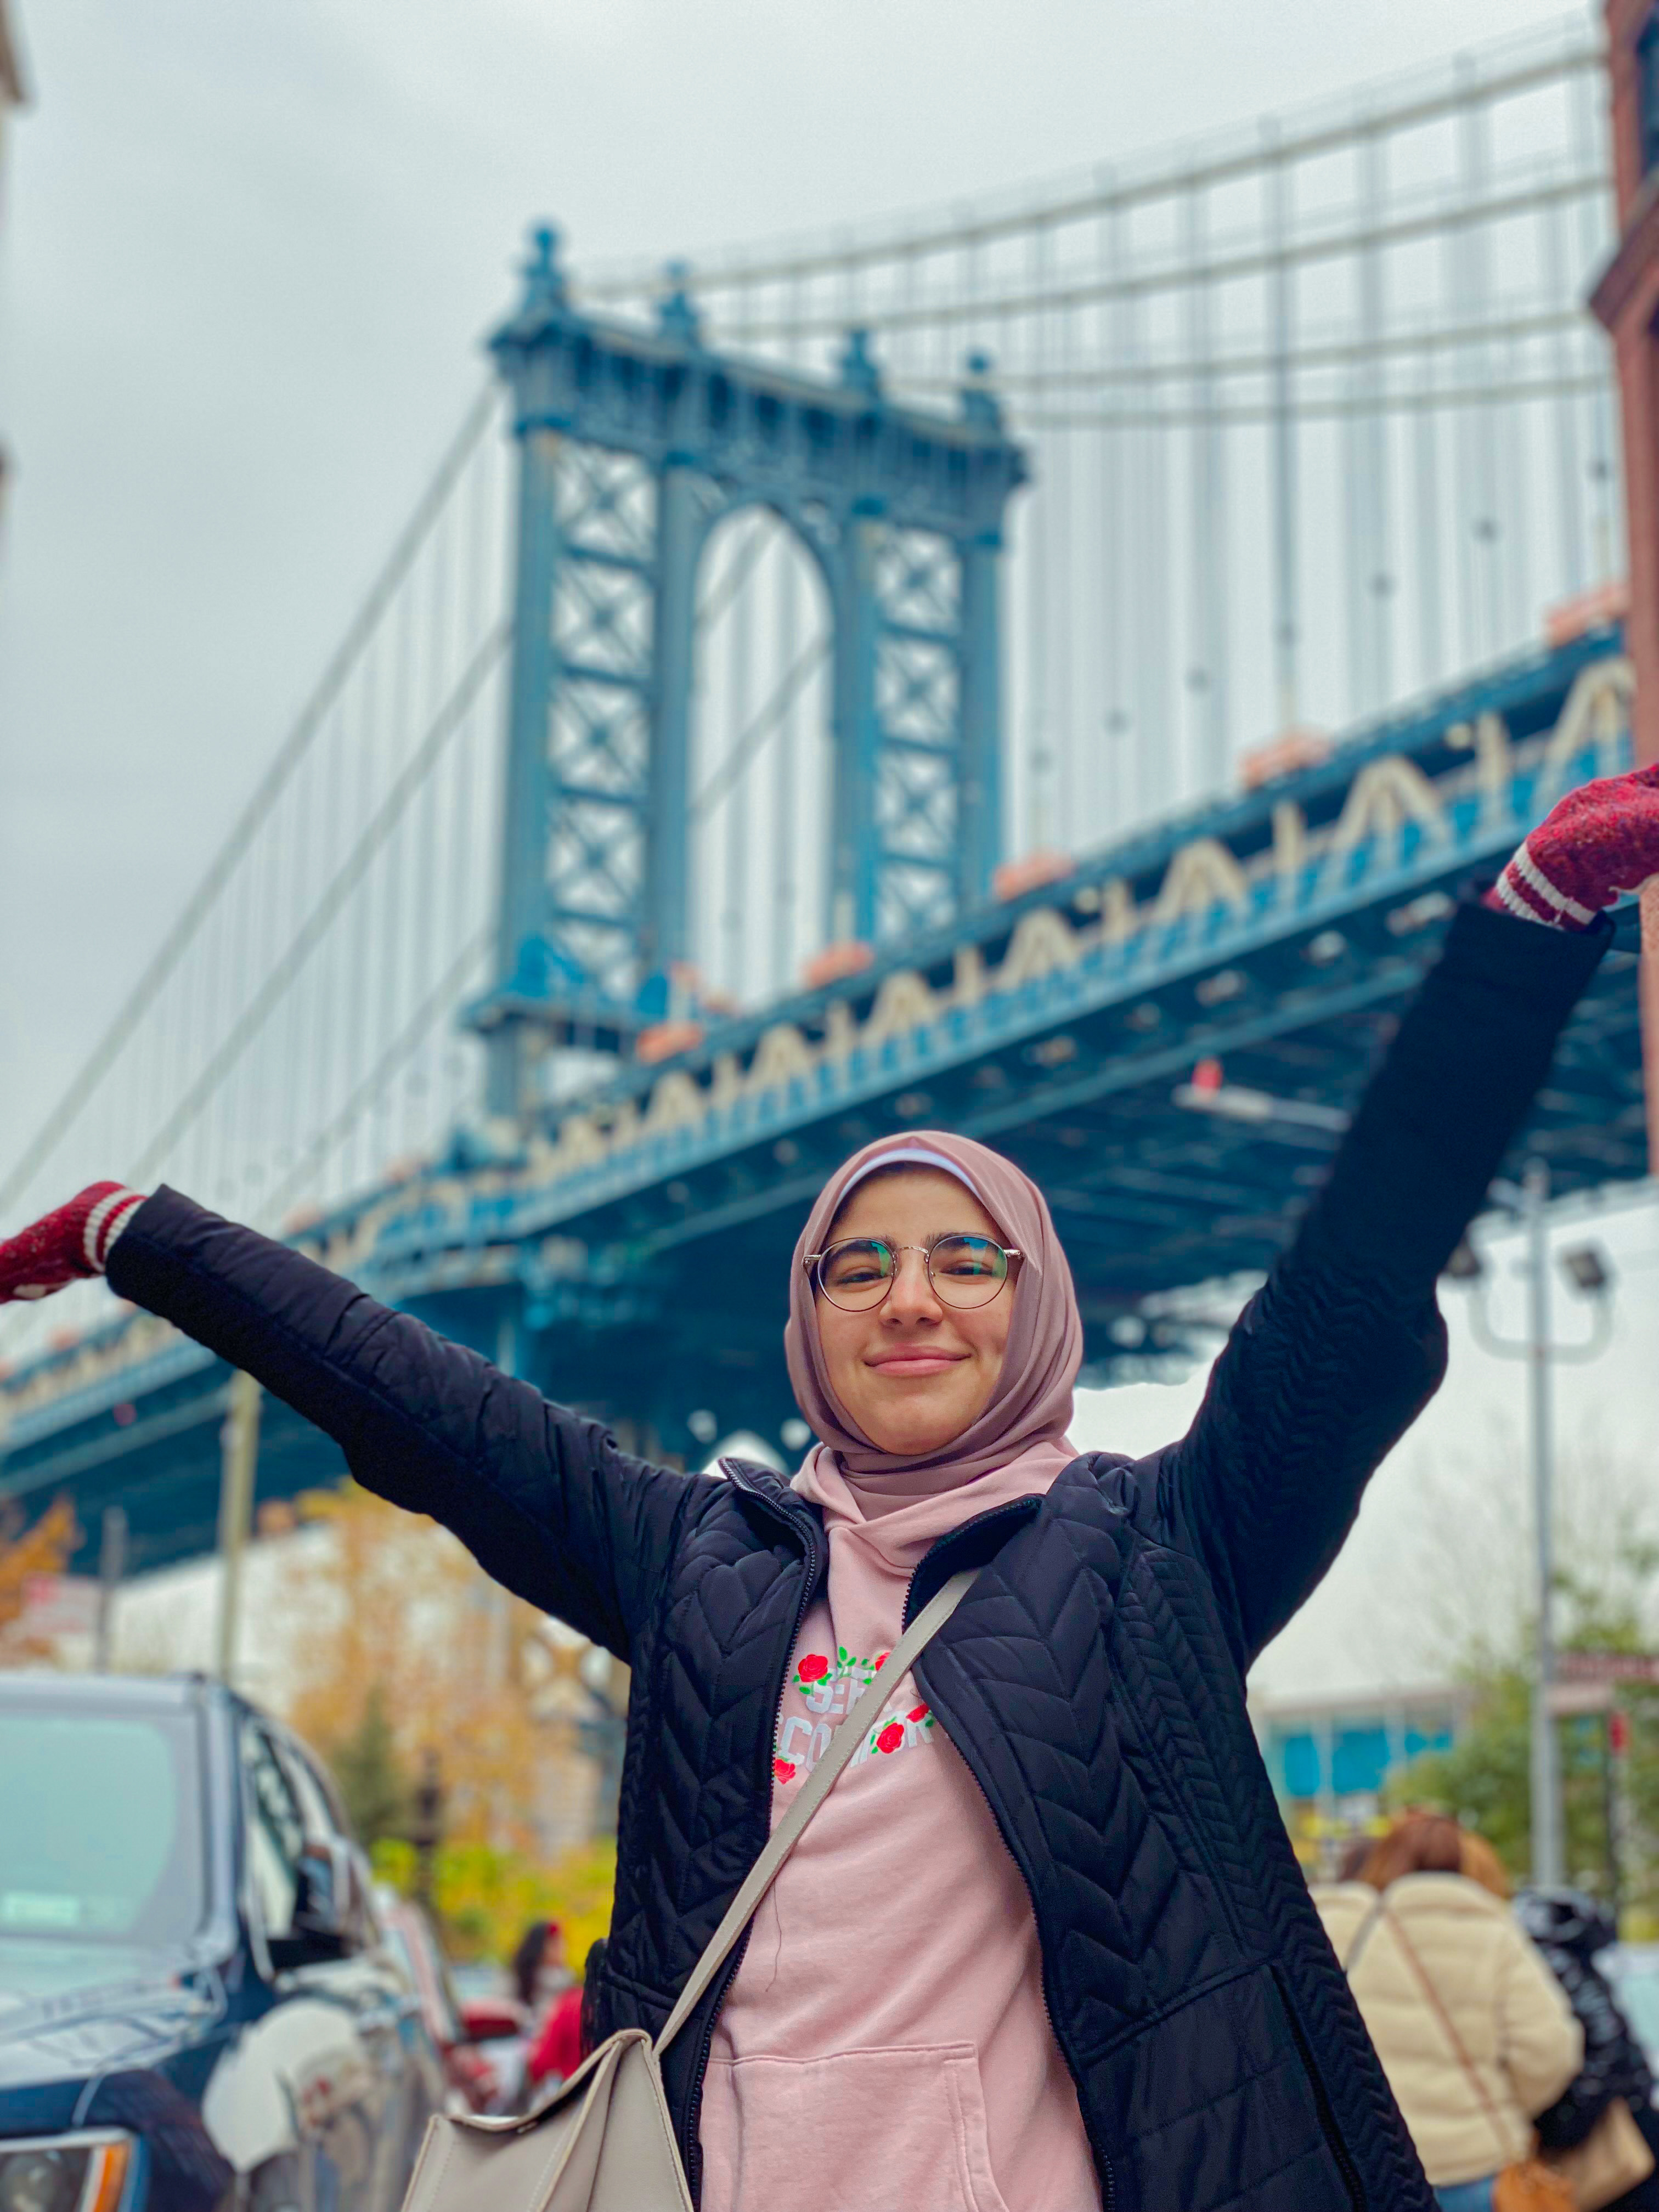 Menna Elzahar poses with her arms up in front of a bridge in the U.S.